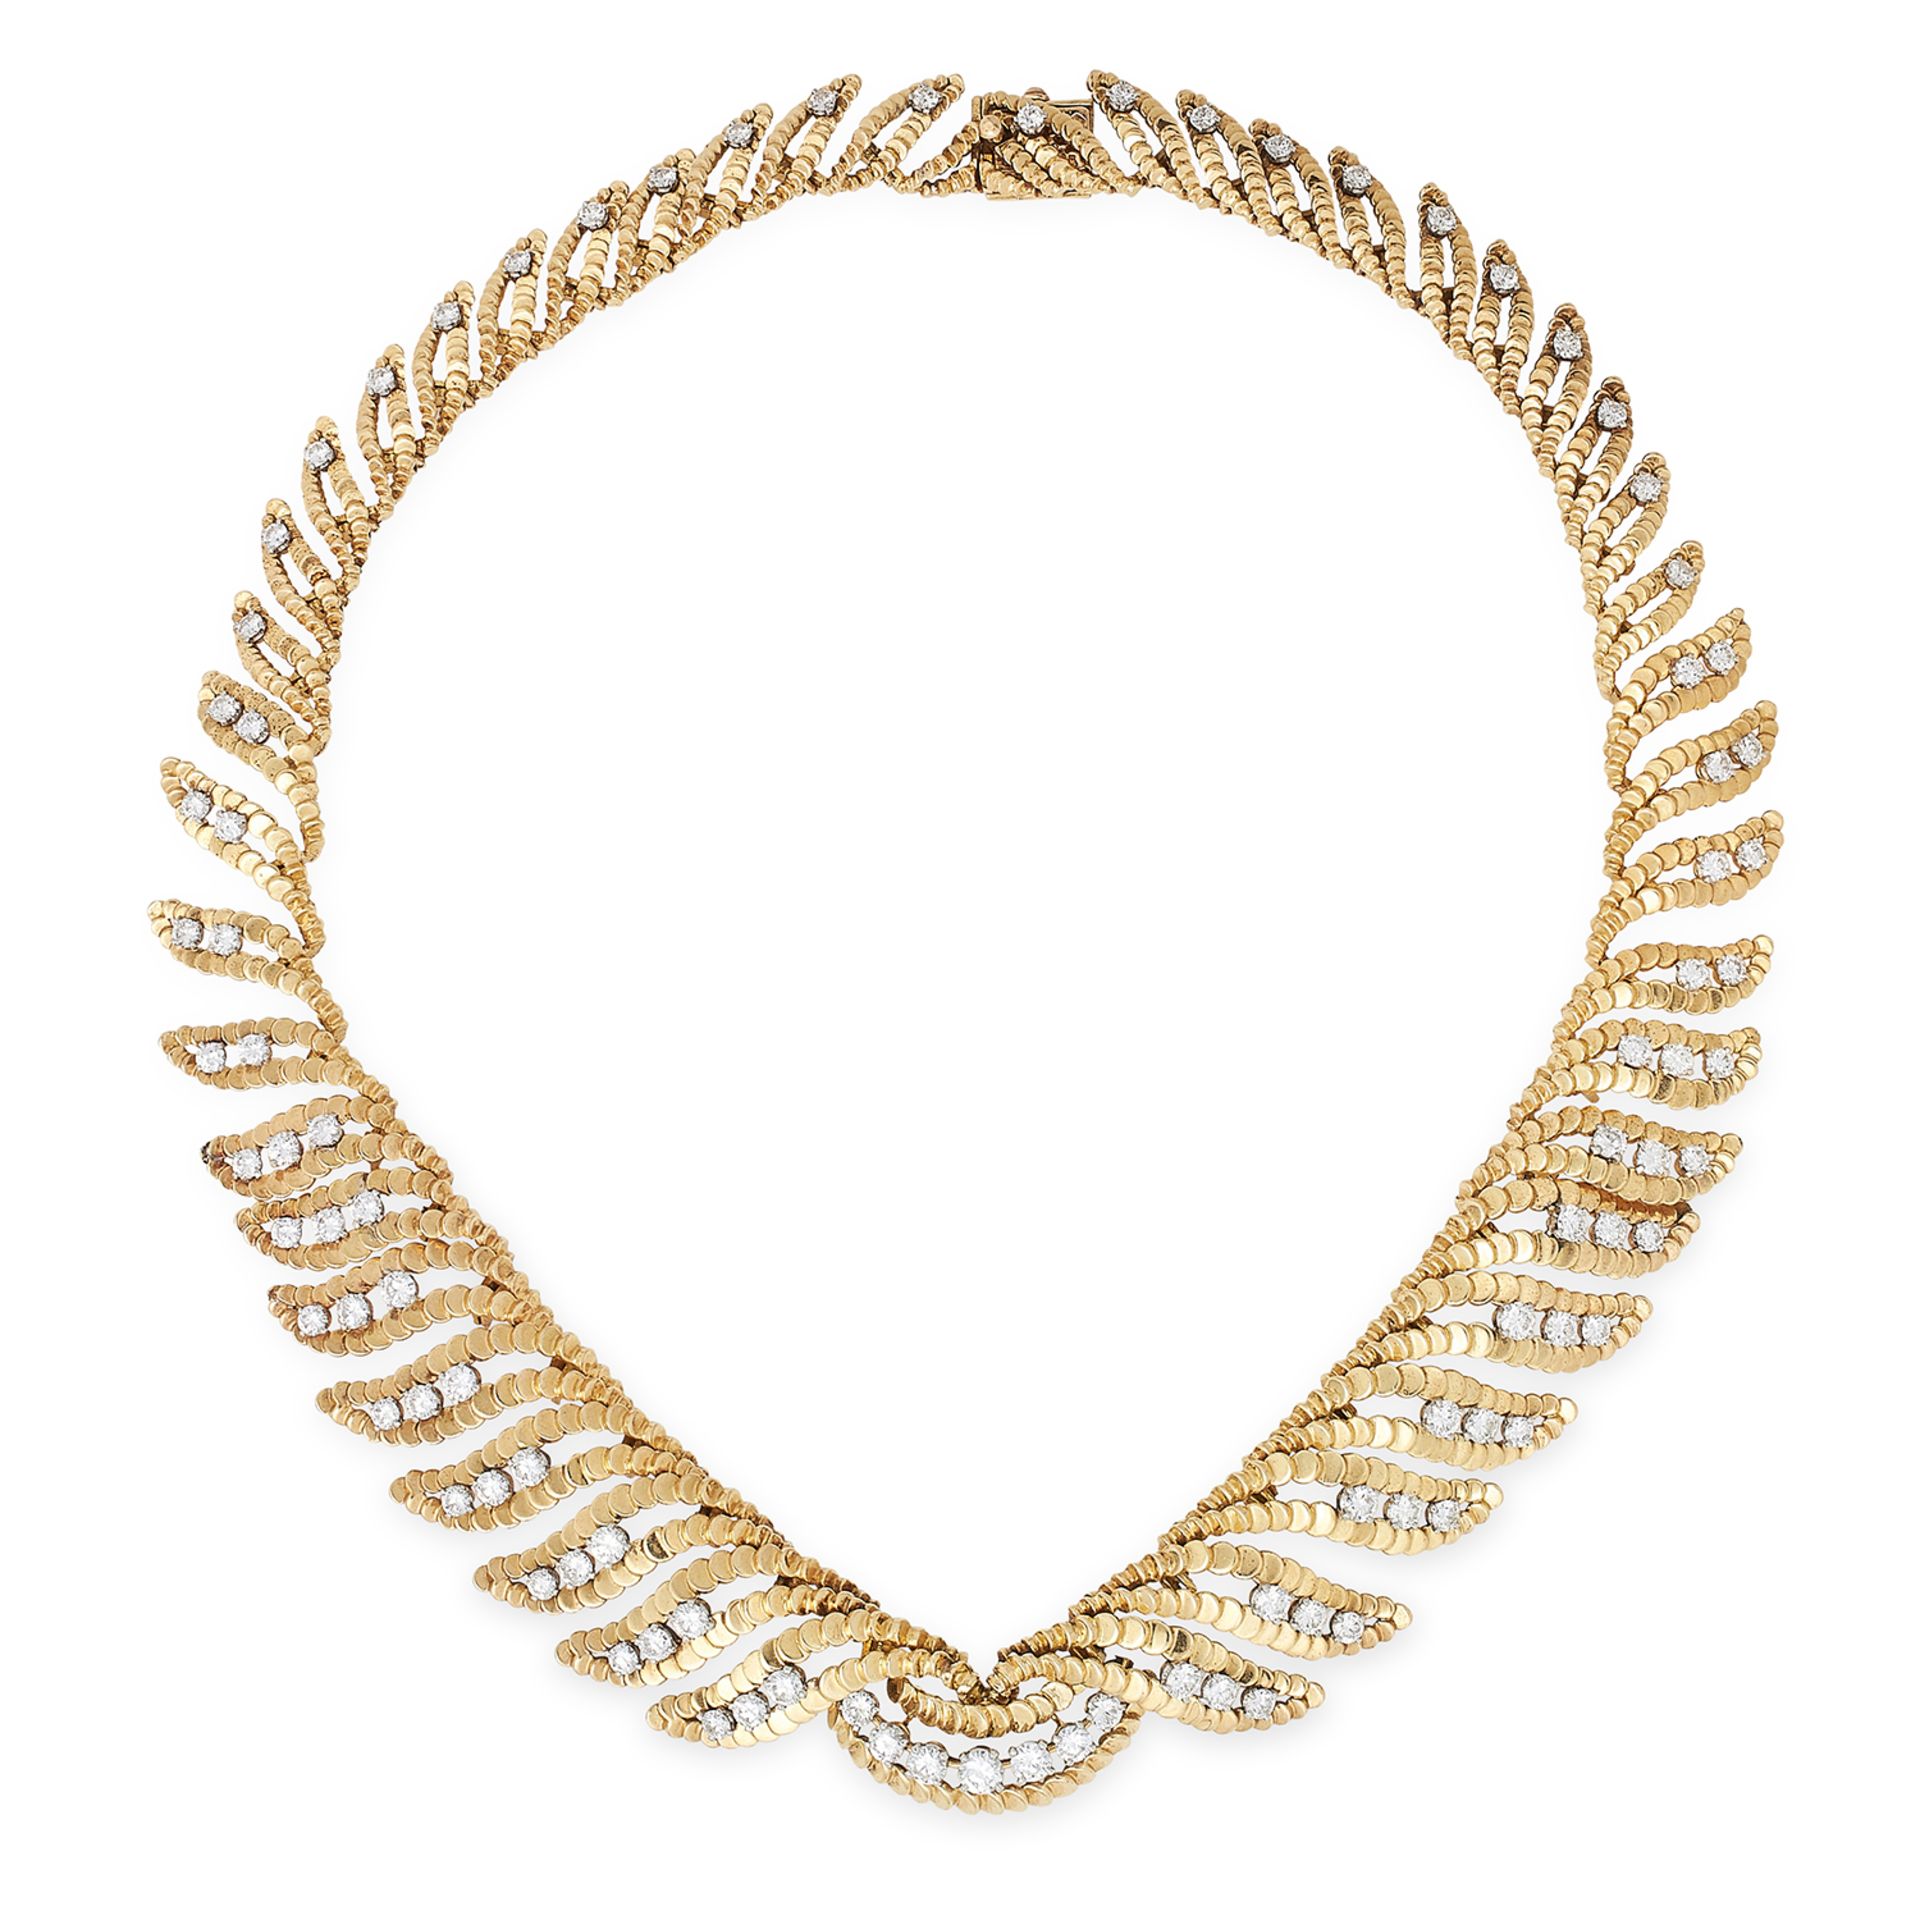 A VINTAGE DIAMOND NECKLACE, BOUCHERON formed of a collar of graduated foliate motifs jewelled with